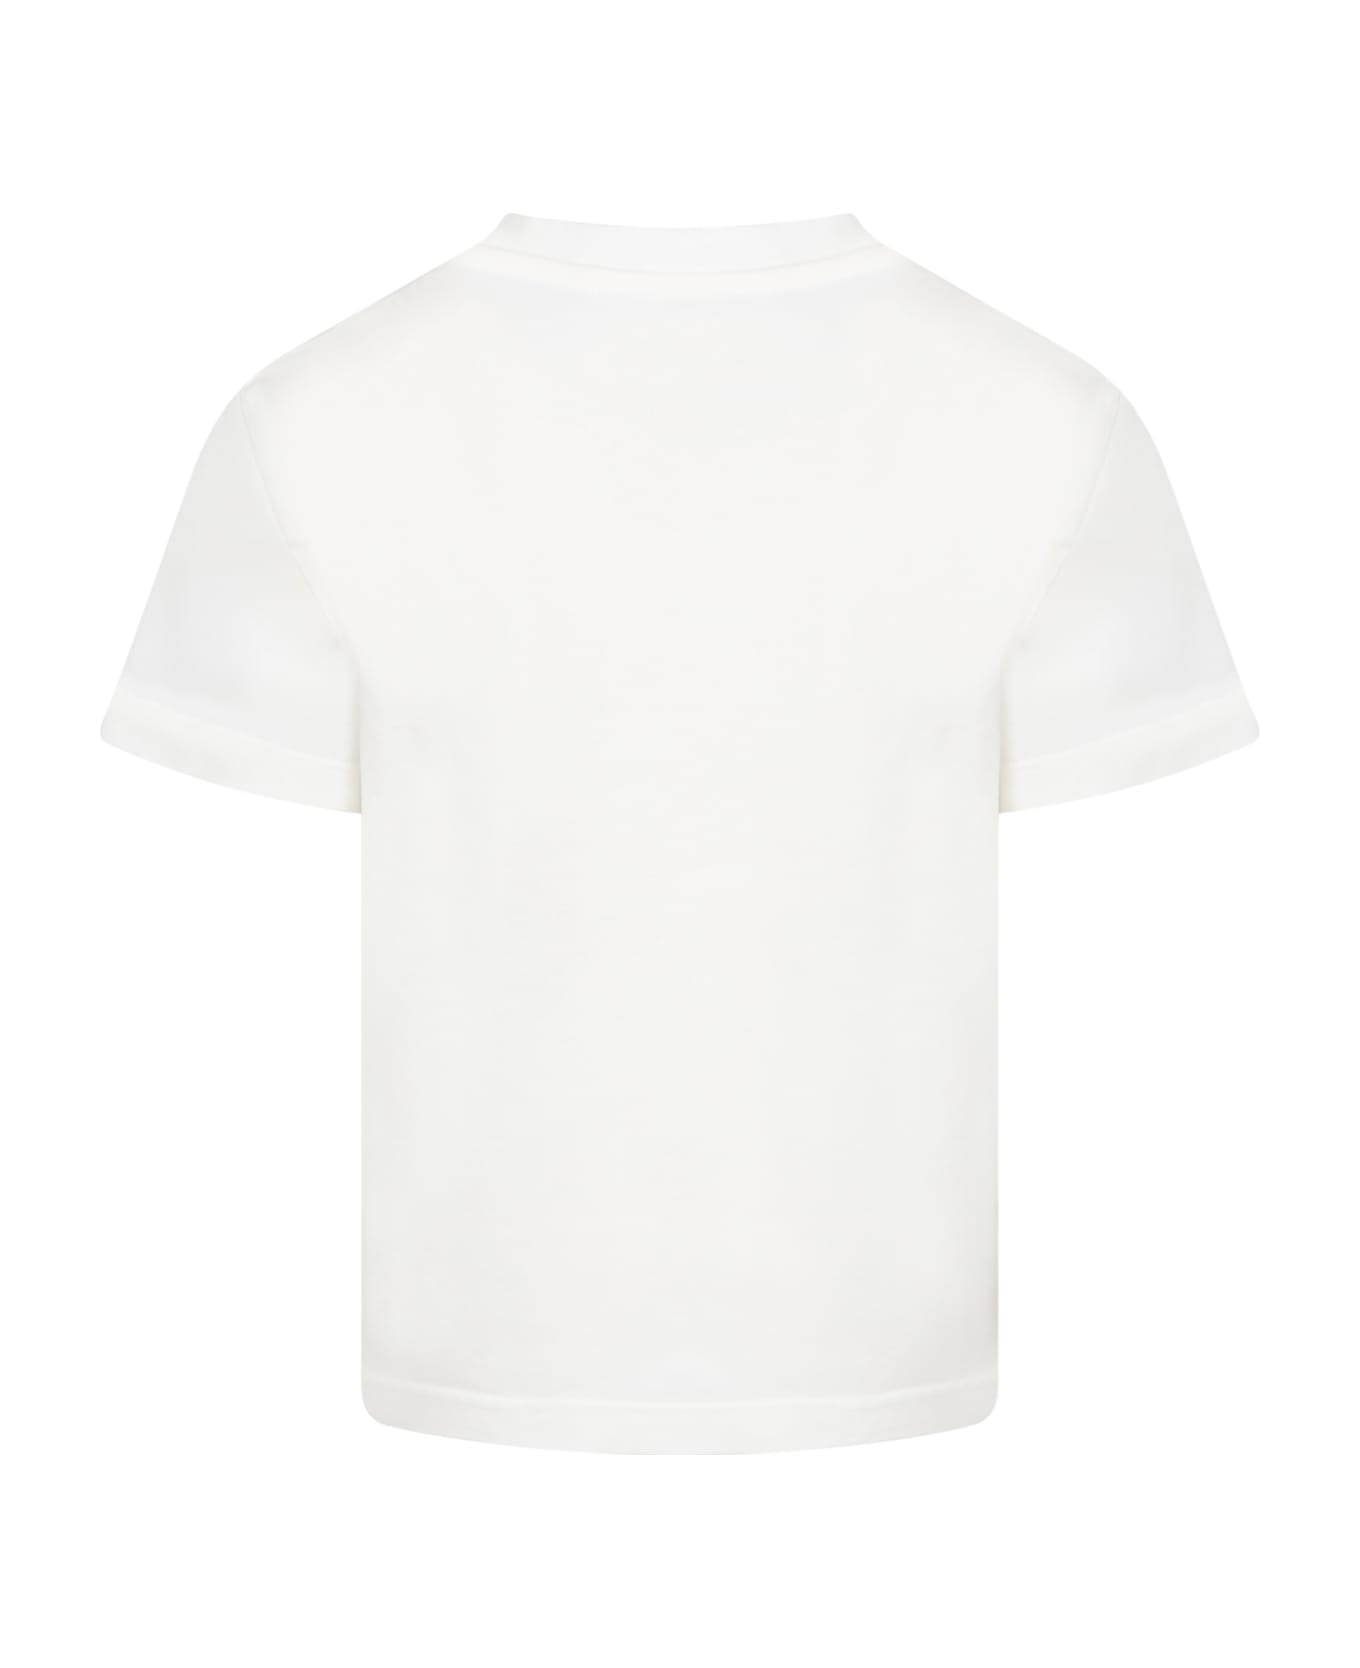 Dolce & Gabbana White T-shirt For Kids With Black Print And Logo - WHITE